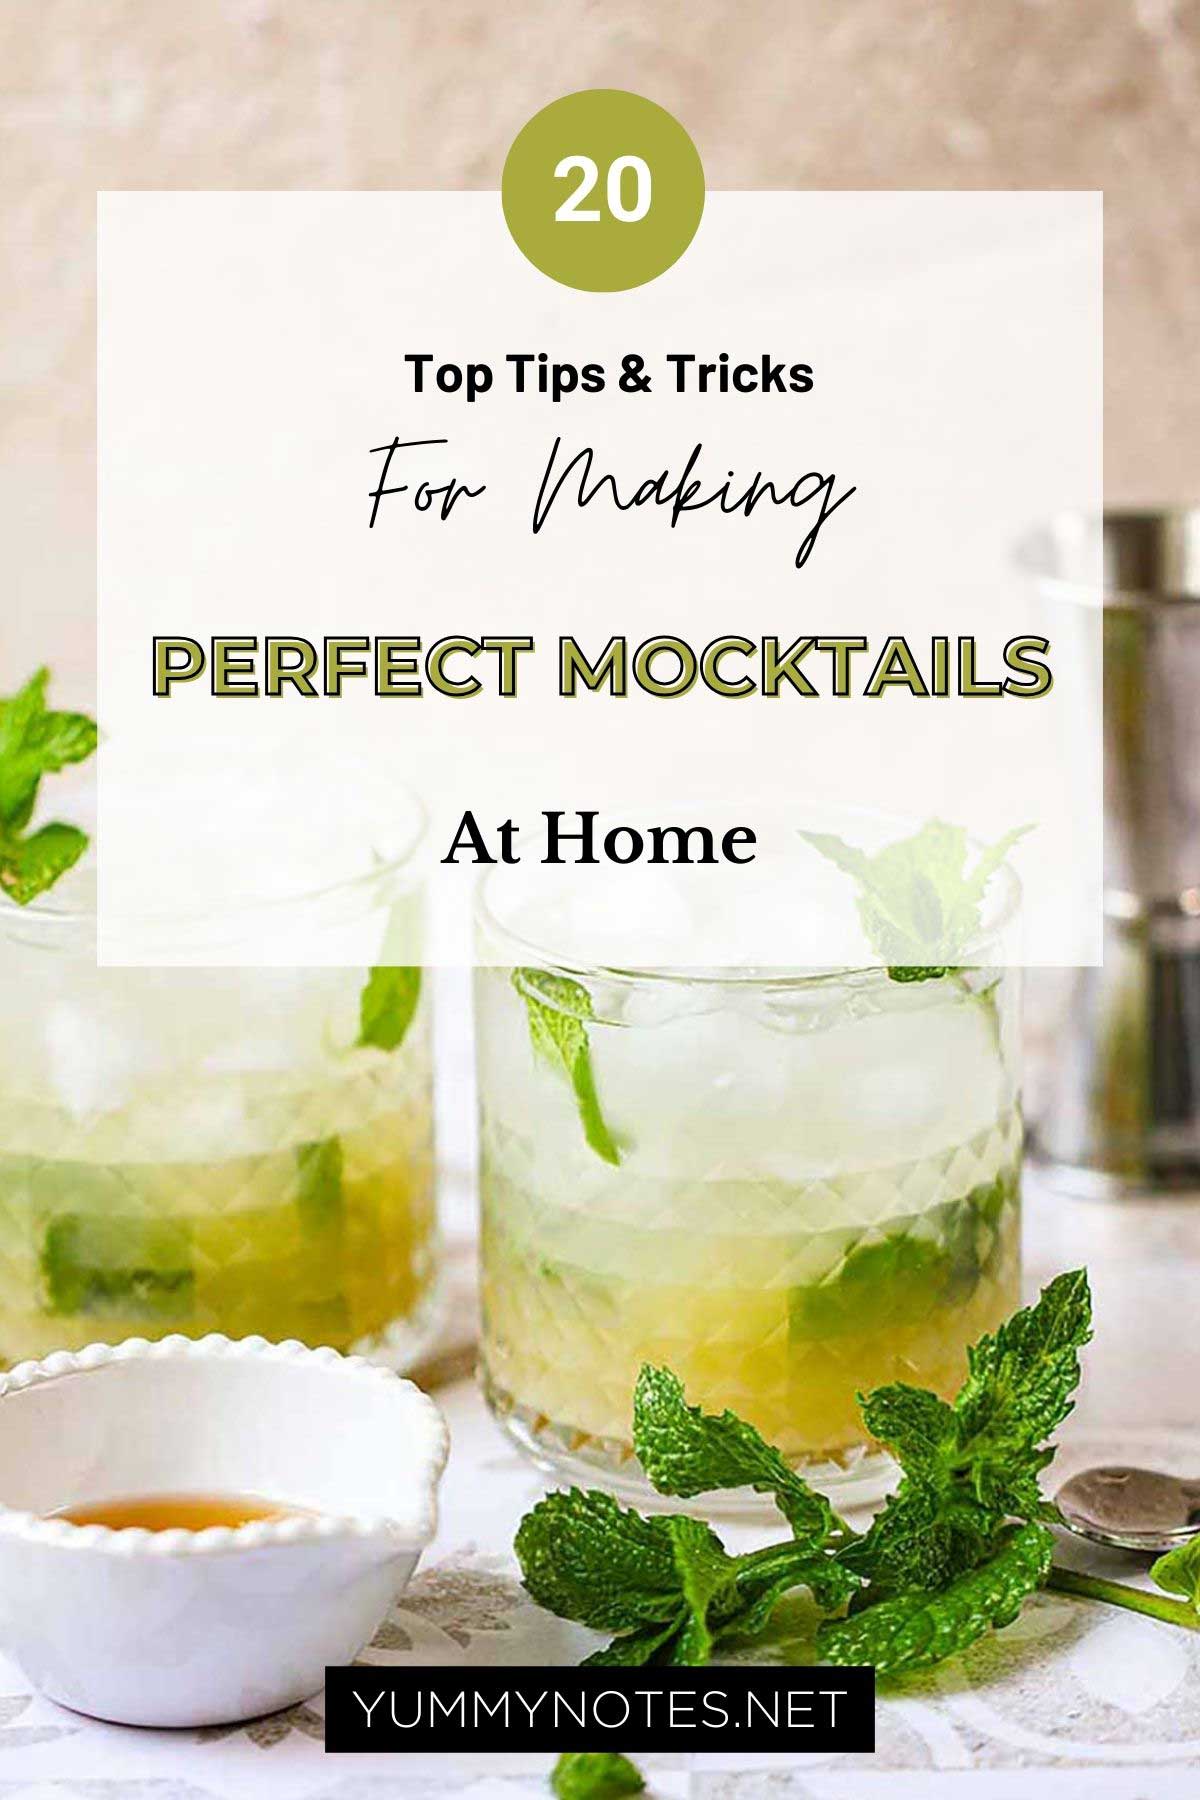 Top 20 Tips & Tricks for Making Perfect Mocktails